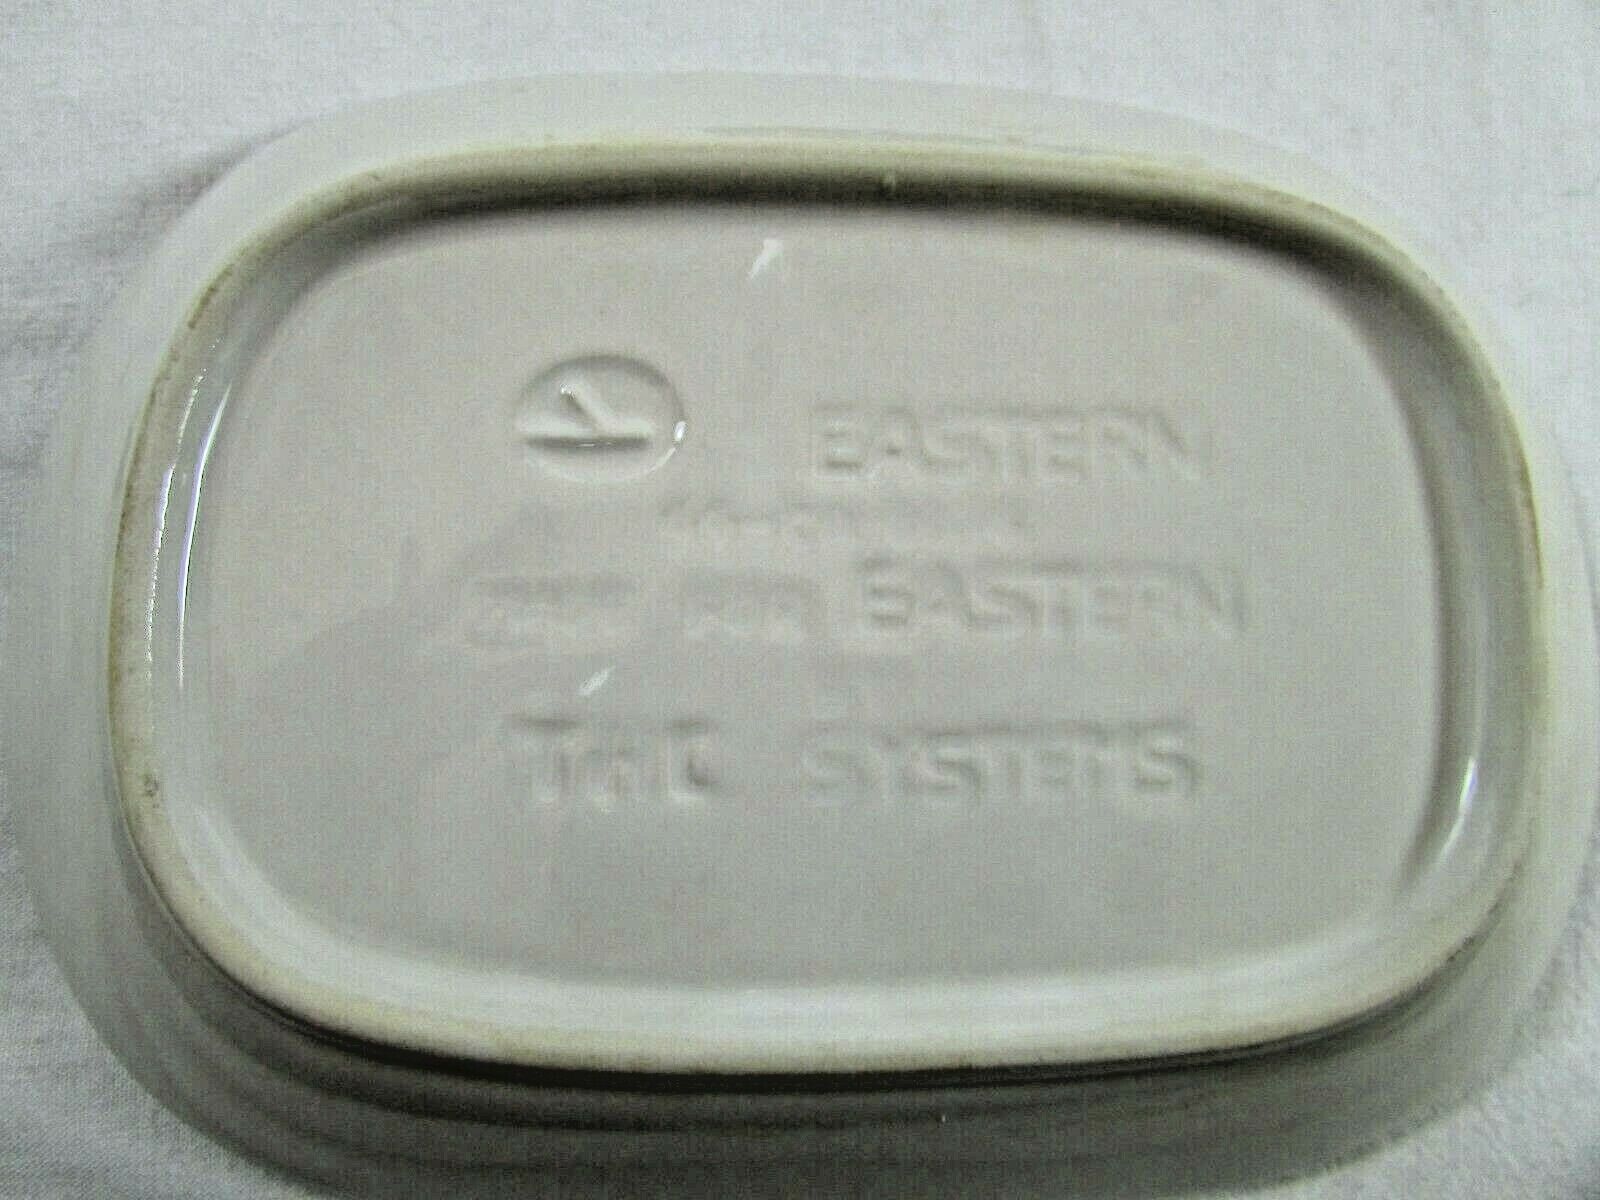 2 Dishes For UNITED AIRLINES & Eastern Airlines By THC Systems PL005 Vintage Без бренда PL 005 - фотография #9